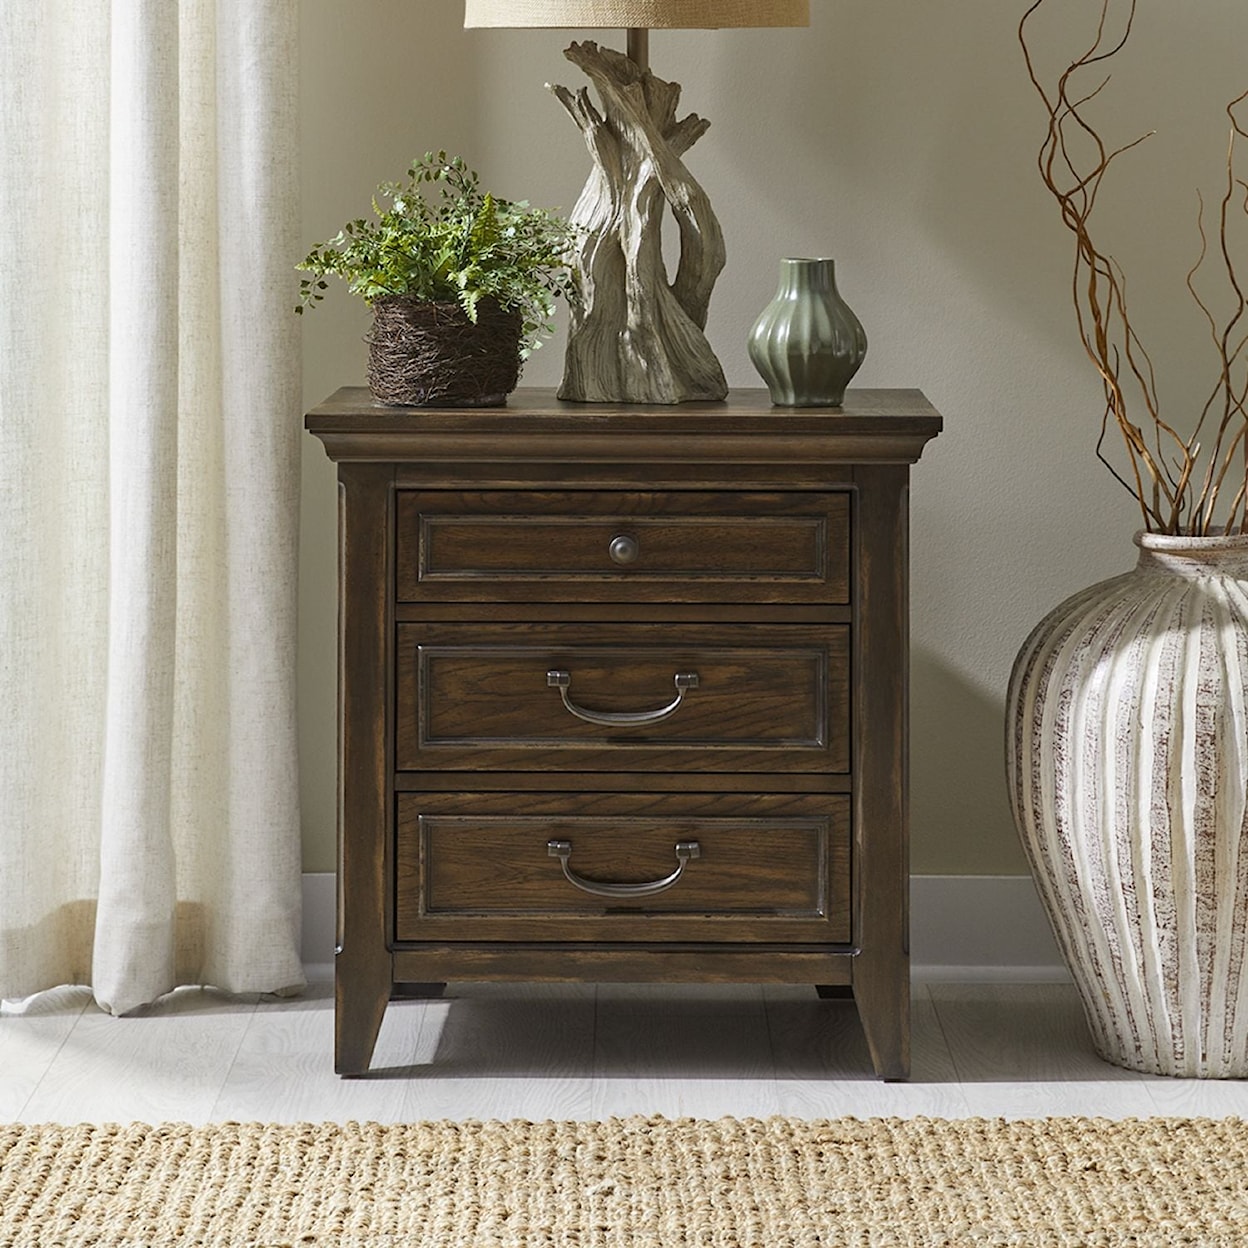 Libby Paradise Valley 3-Drawer Nightstand